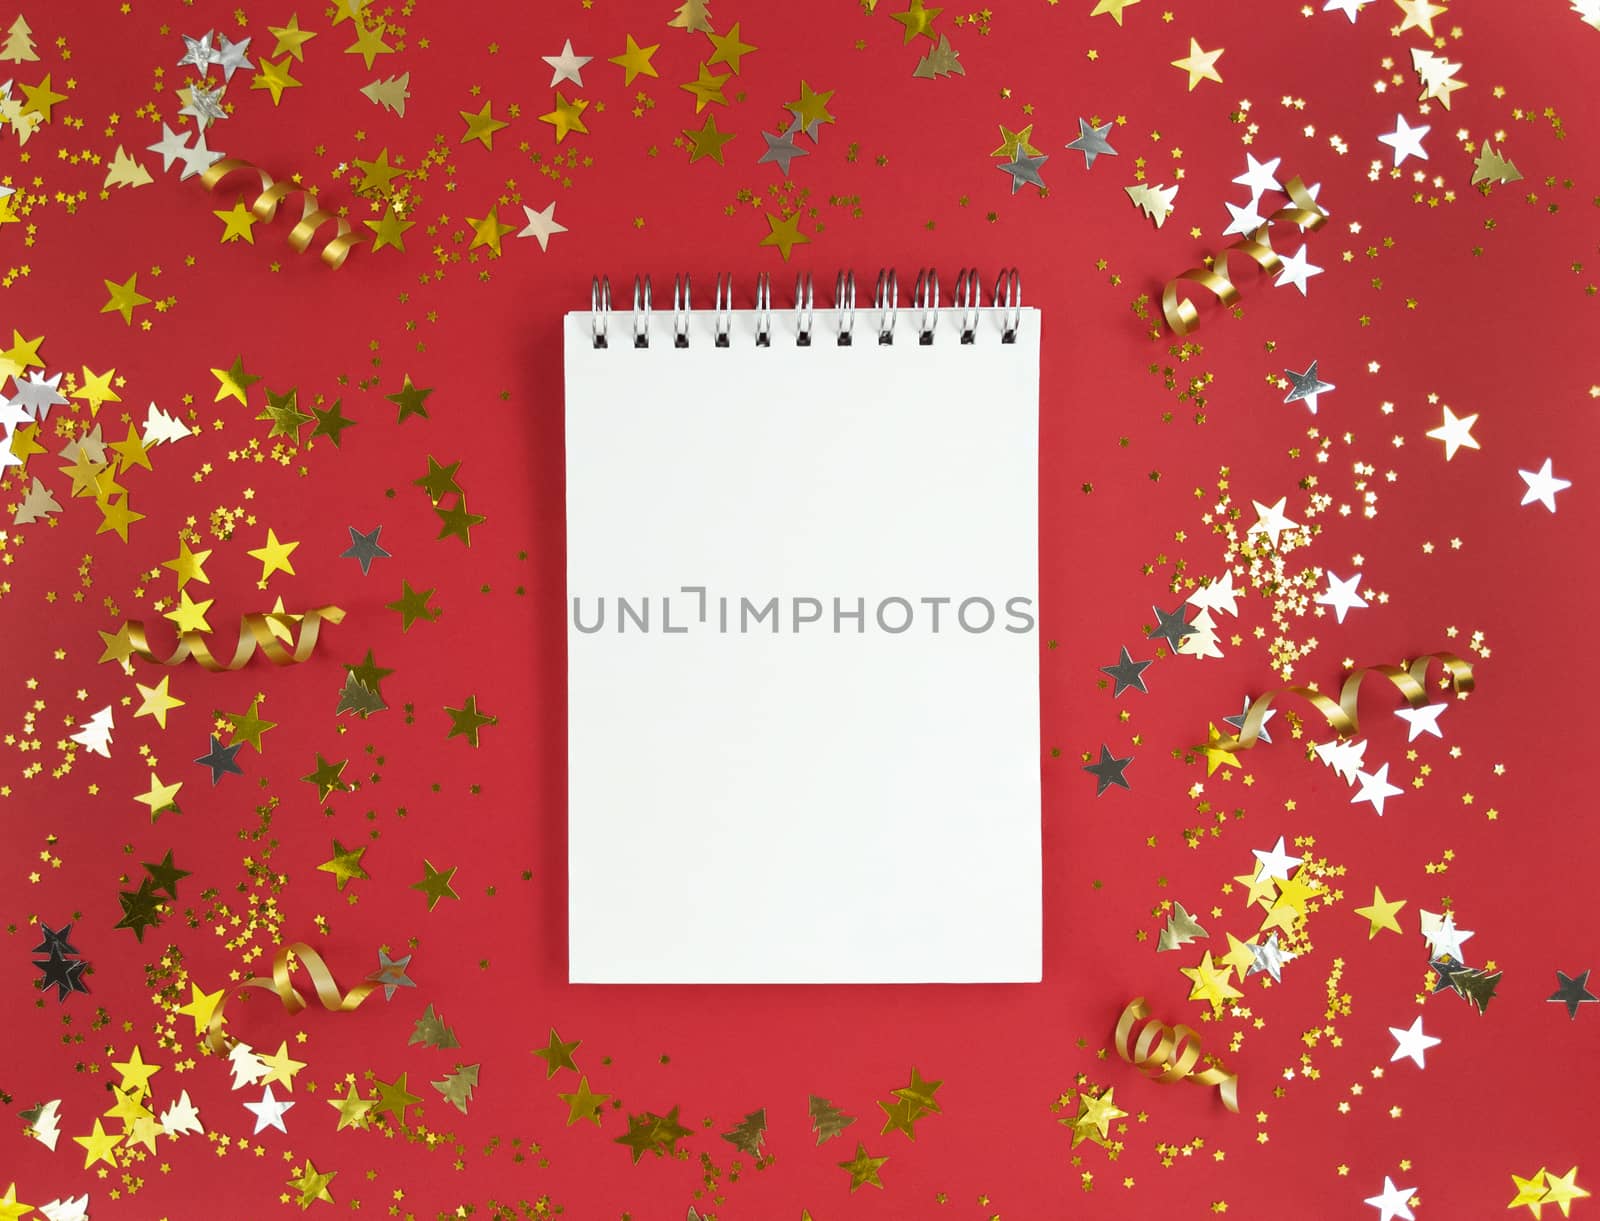 White blank sheet of notebook on red background with scattered confetti. Holiday education concept. Stock photo.